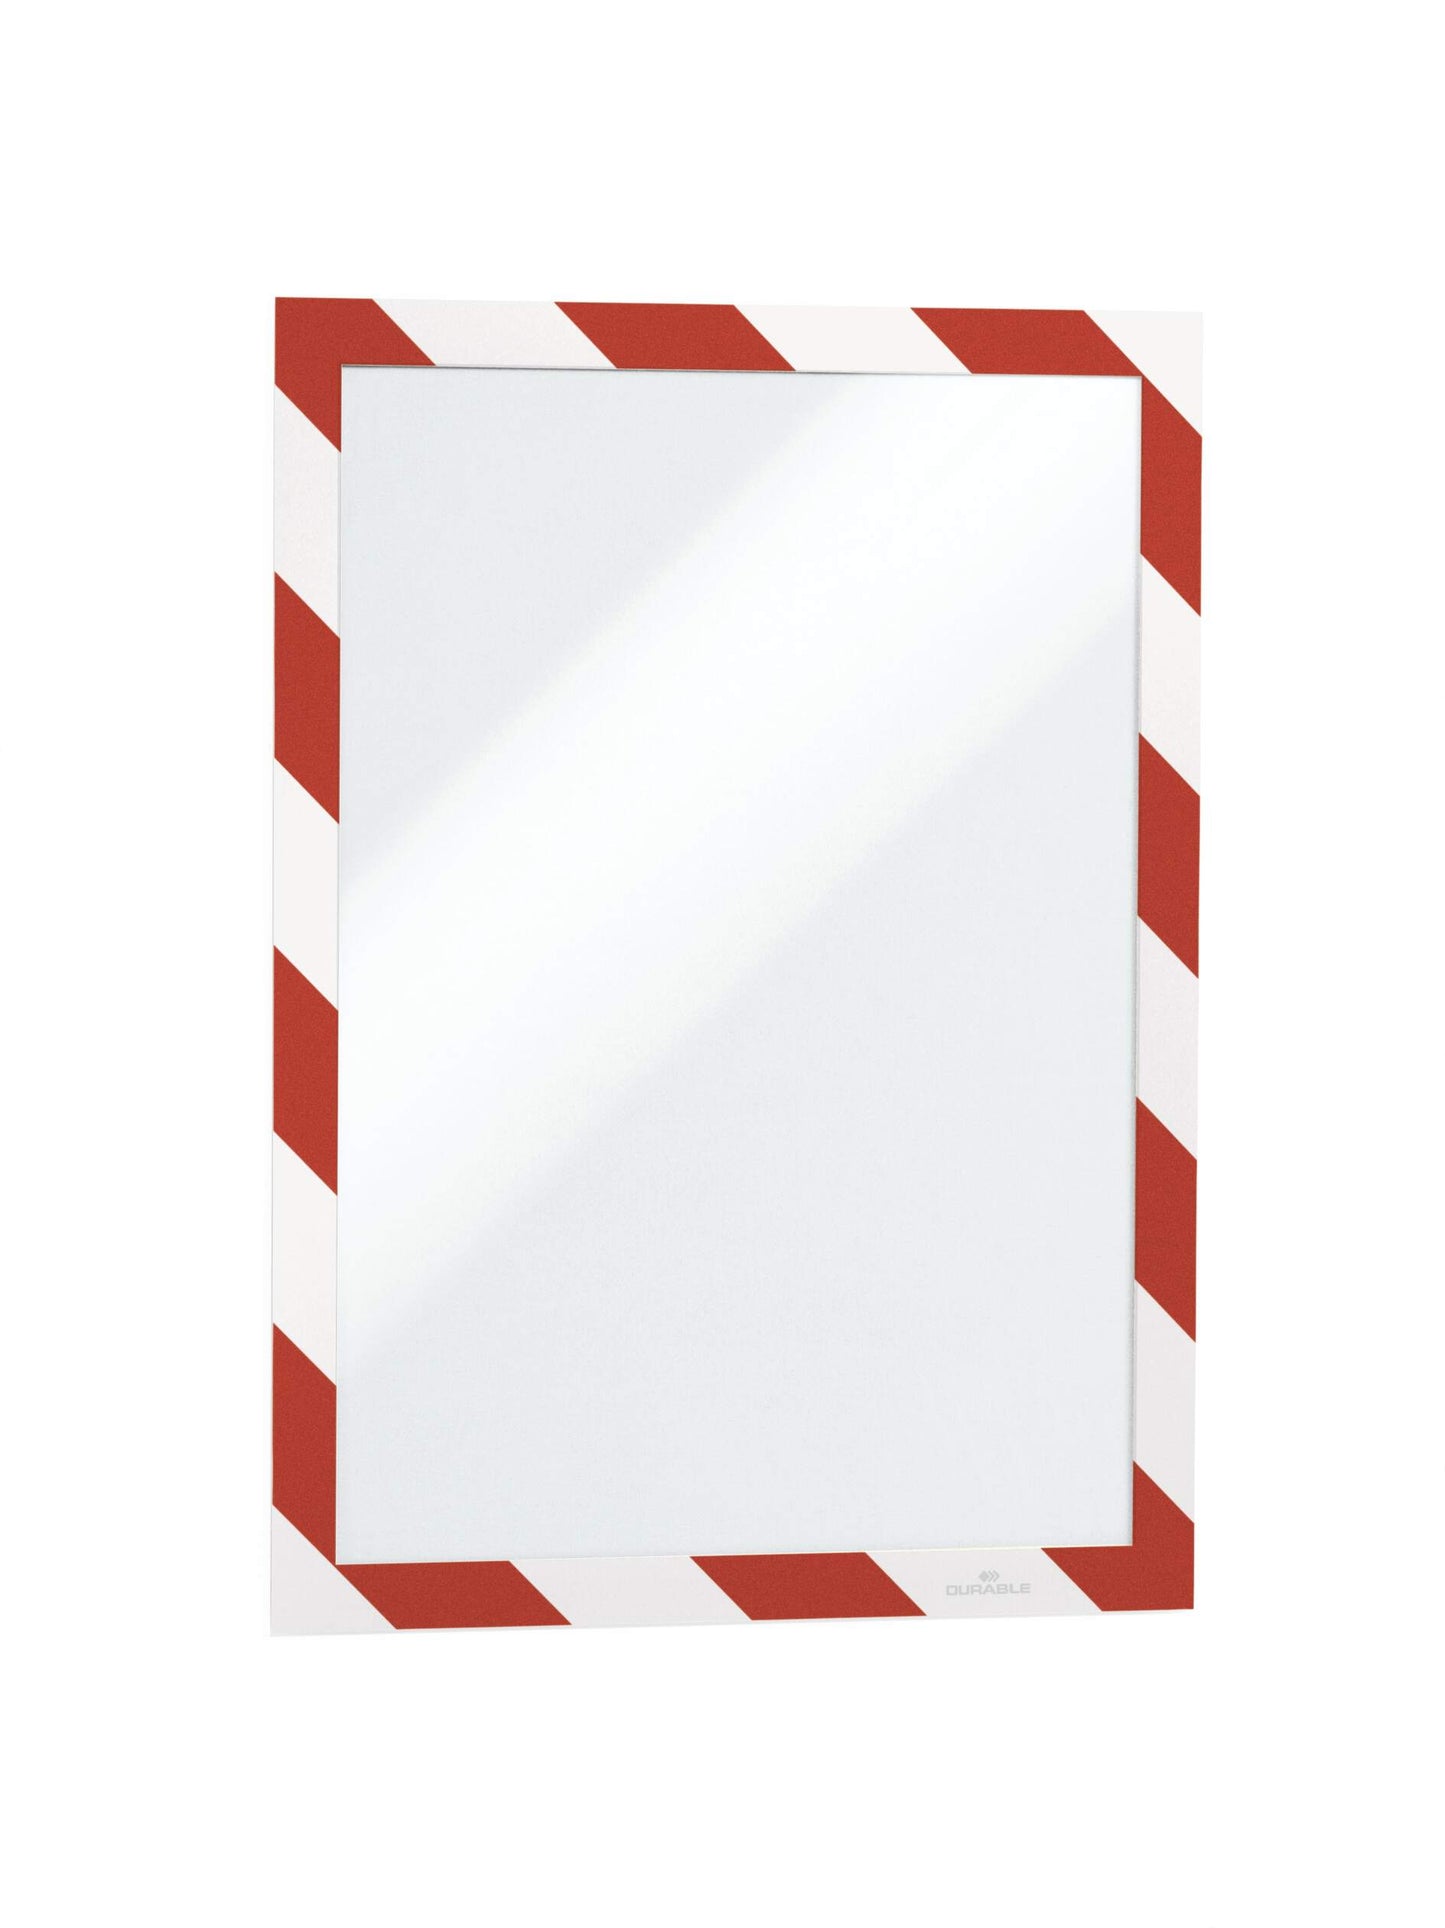 Durable DURAFRAME Adhesive Magnetic Signage Hazard Frame | 2 Pack | A4 Red